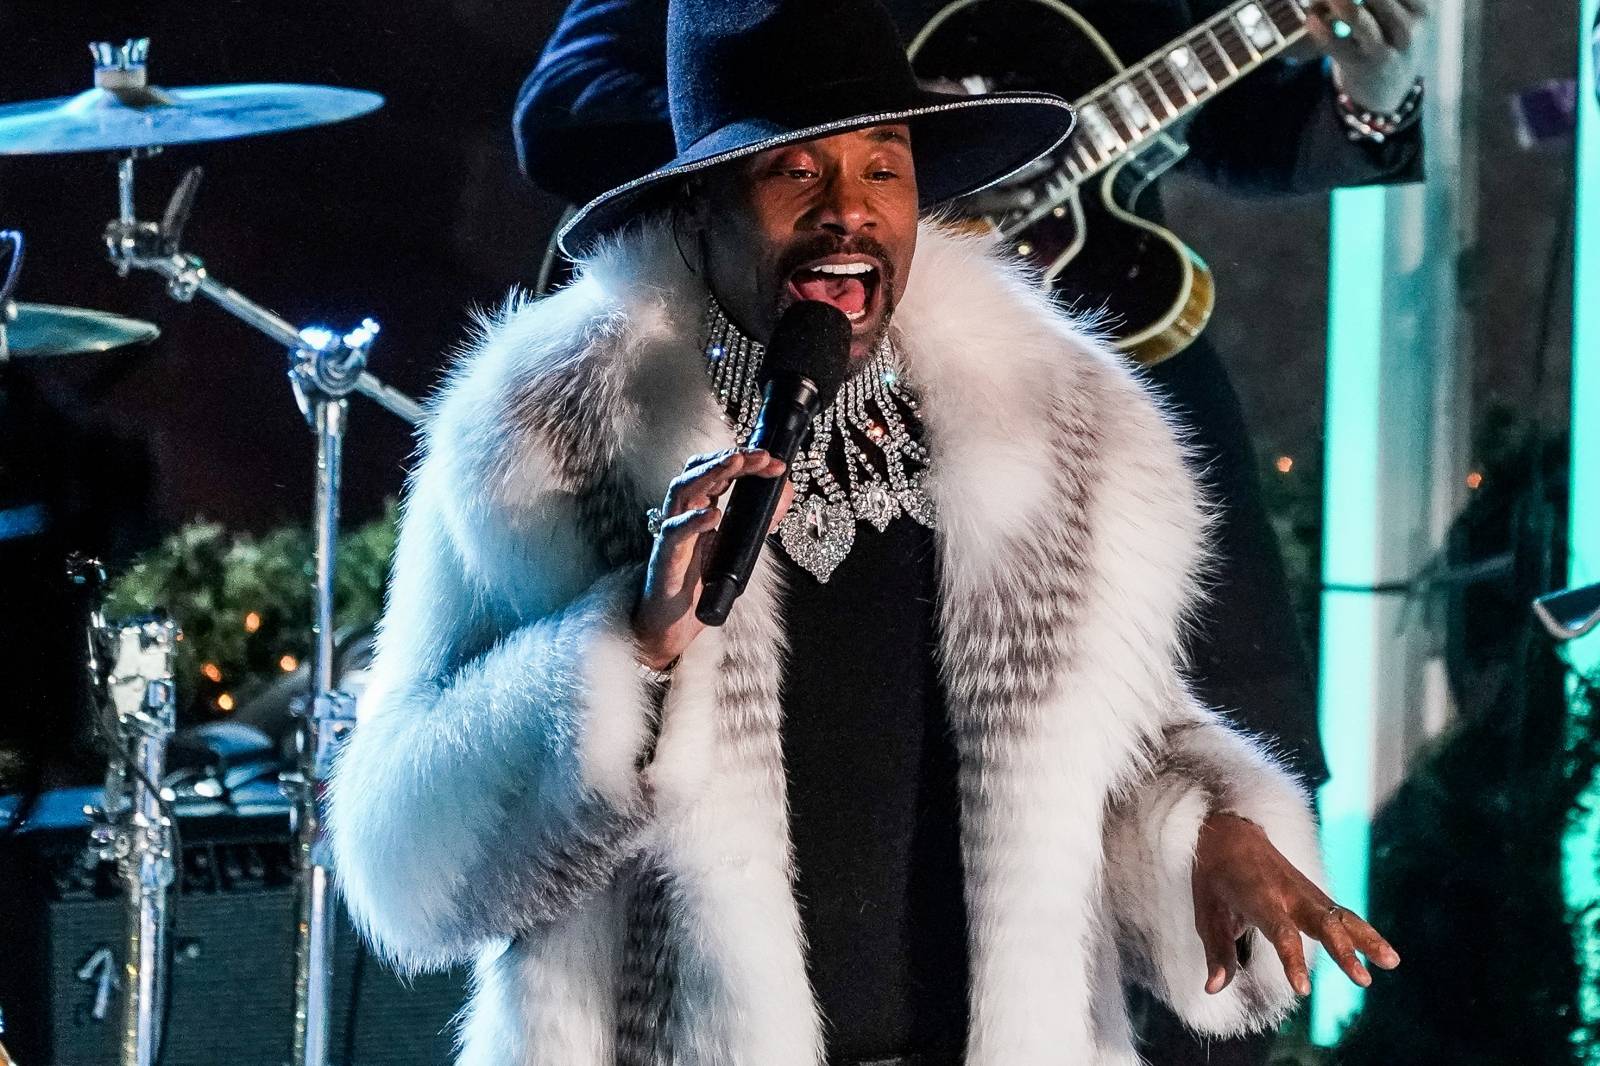 Billy Porter performs during the Christmas tree lighting show at Rockefeller Center in the Manhattan borough of New York City, New York